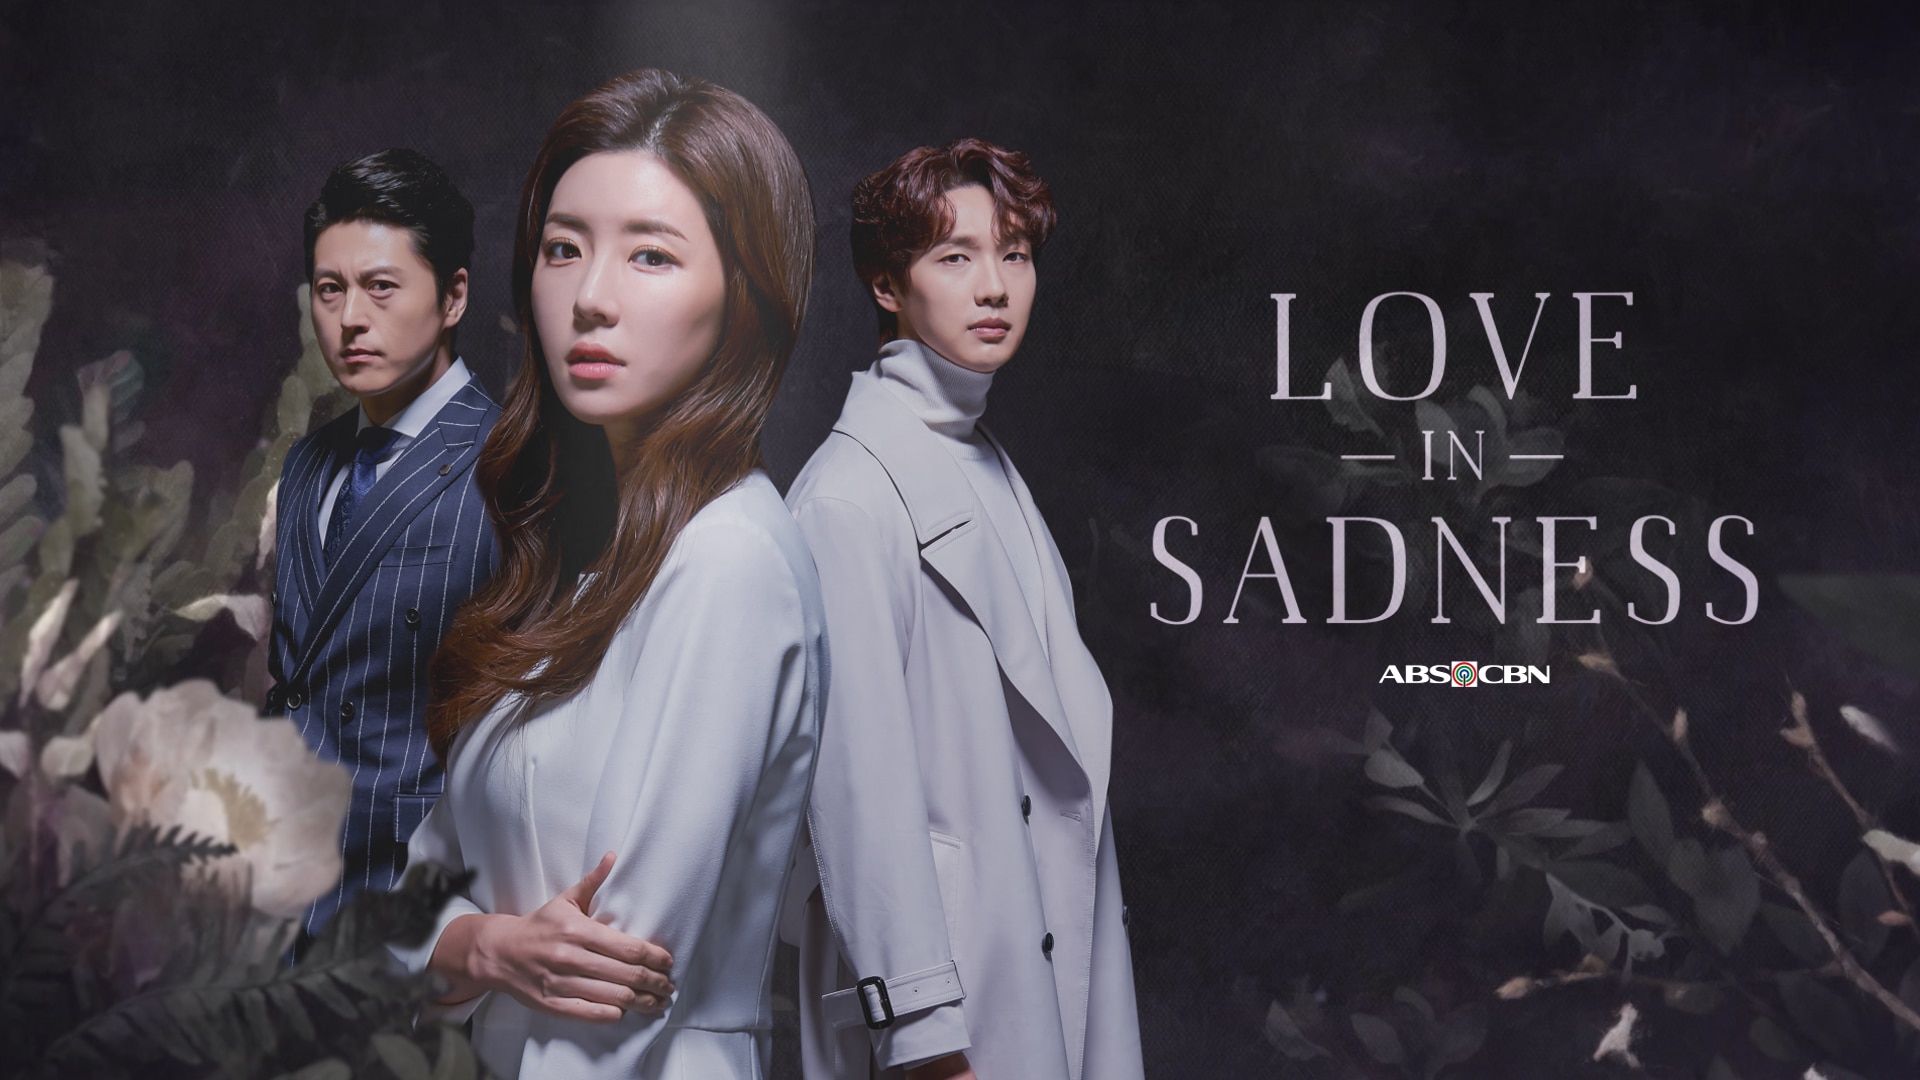 A woman trapped in an abusive marriage gets a new life in "Love in Sadness"